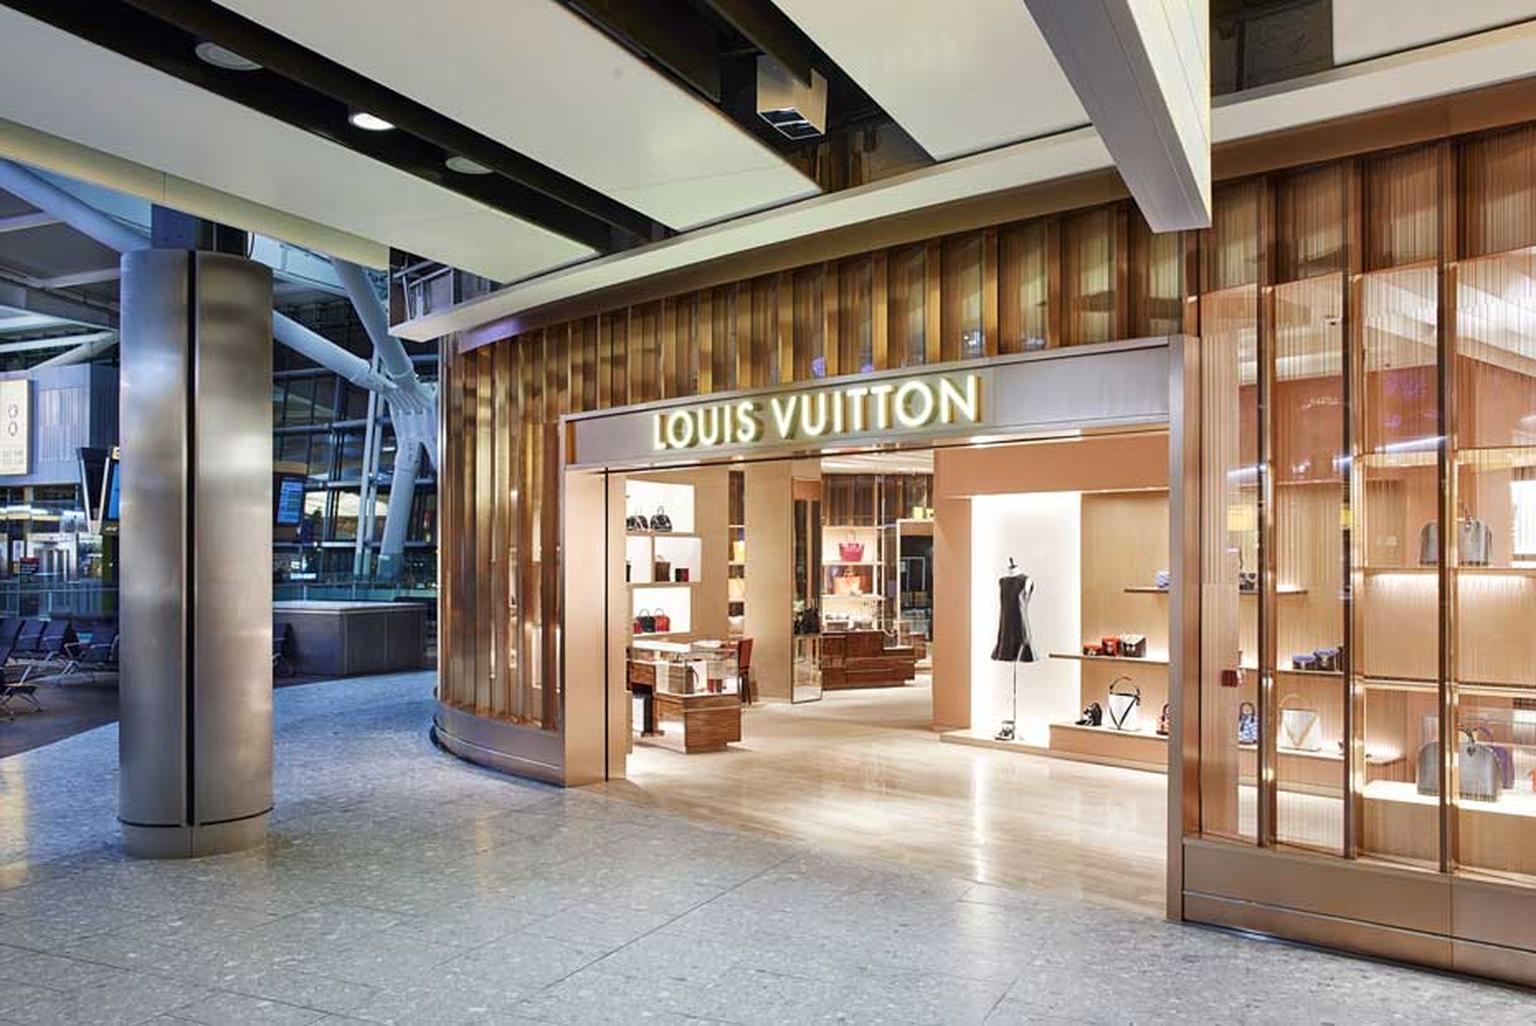 Opening of the 1st Louis Vuitton store in Paris-Charles de Gaulle